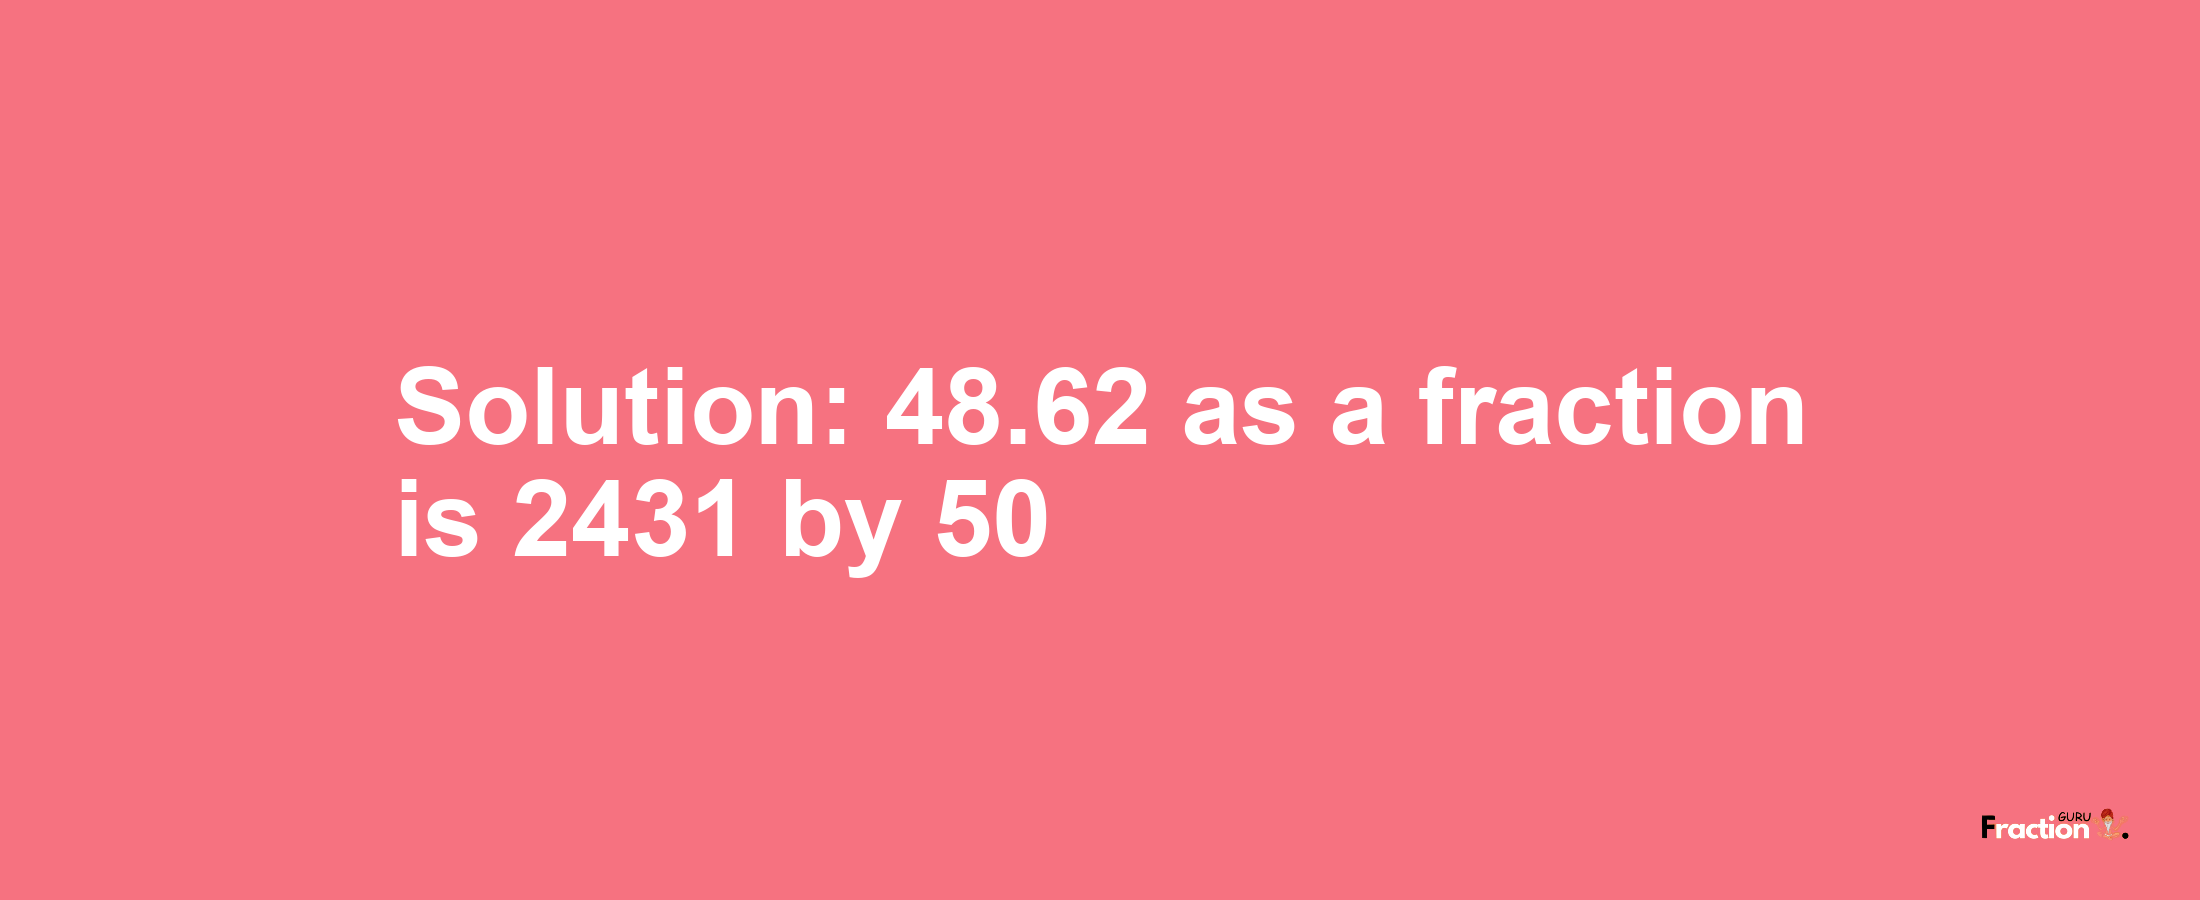 Solution:48.62 as a fraction is 2431/50